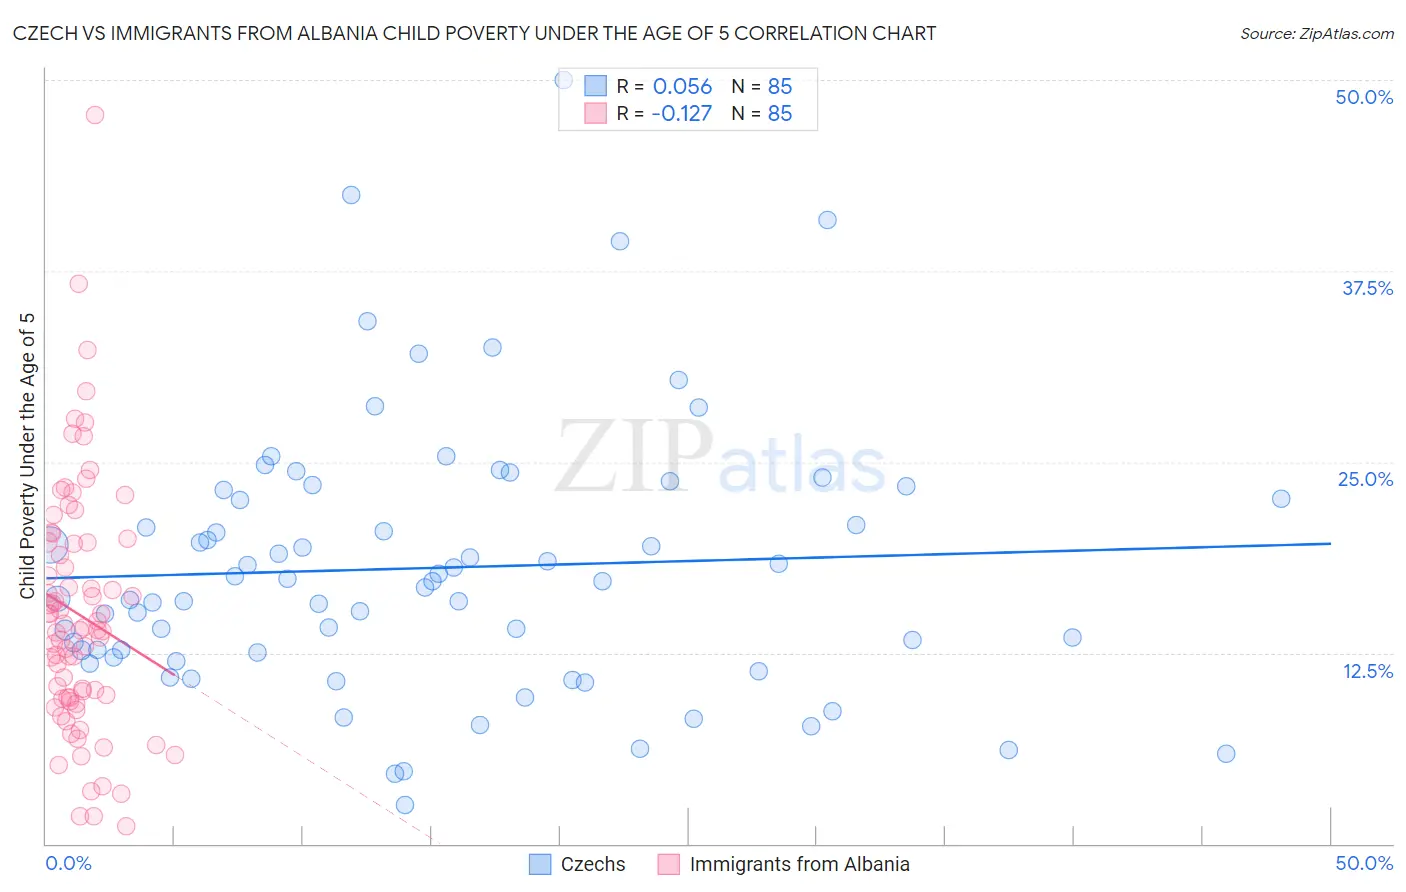 Czech vs Immigrants from Albania Child Poverty Under the Age of 5